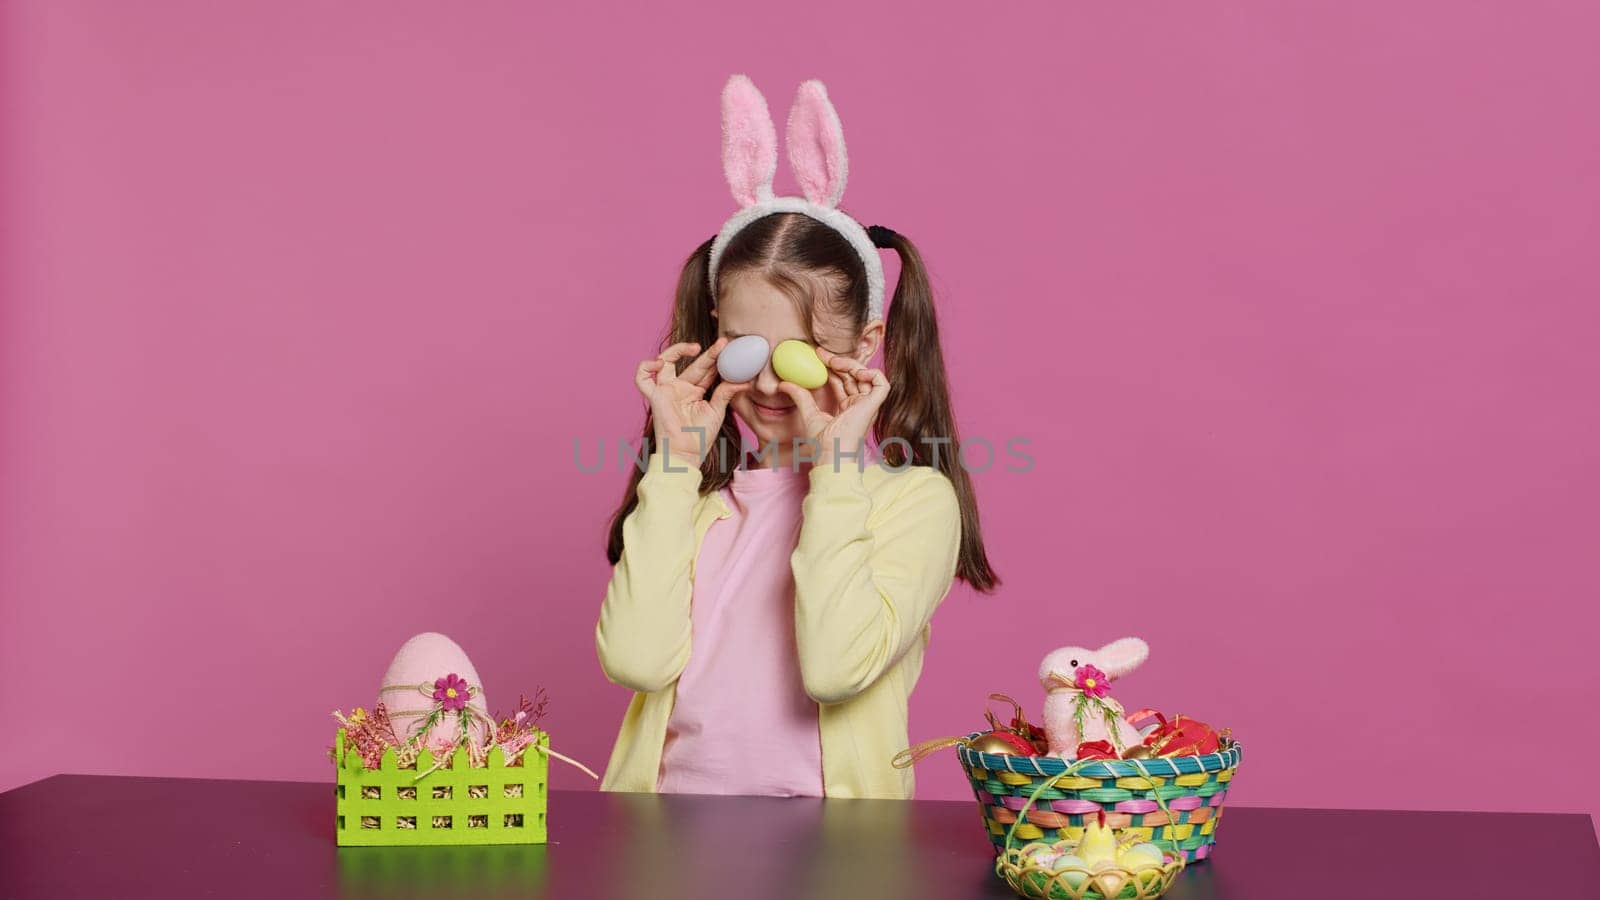 Enthusiastic young girl playing peek a boo in front of camera, using painted easter eggs against pink background. Joyful lovely toddler feeling excited about spring holiday festivity. Camera A.